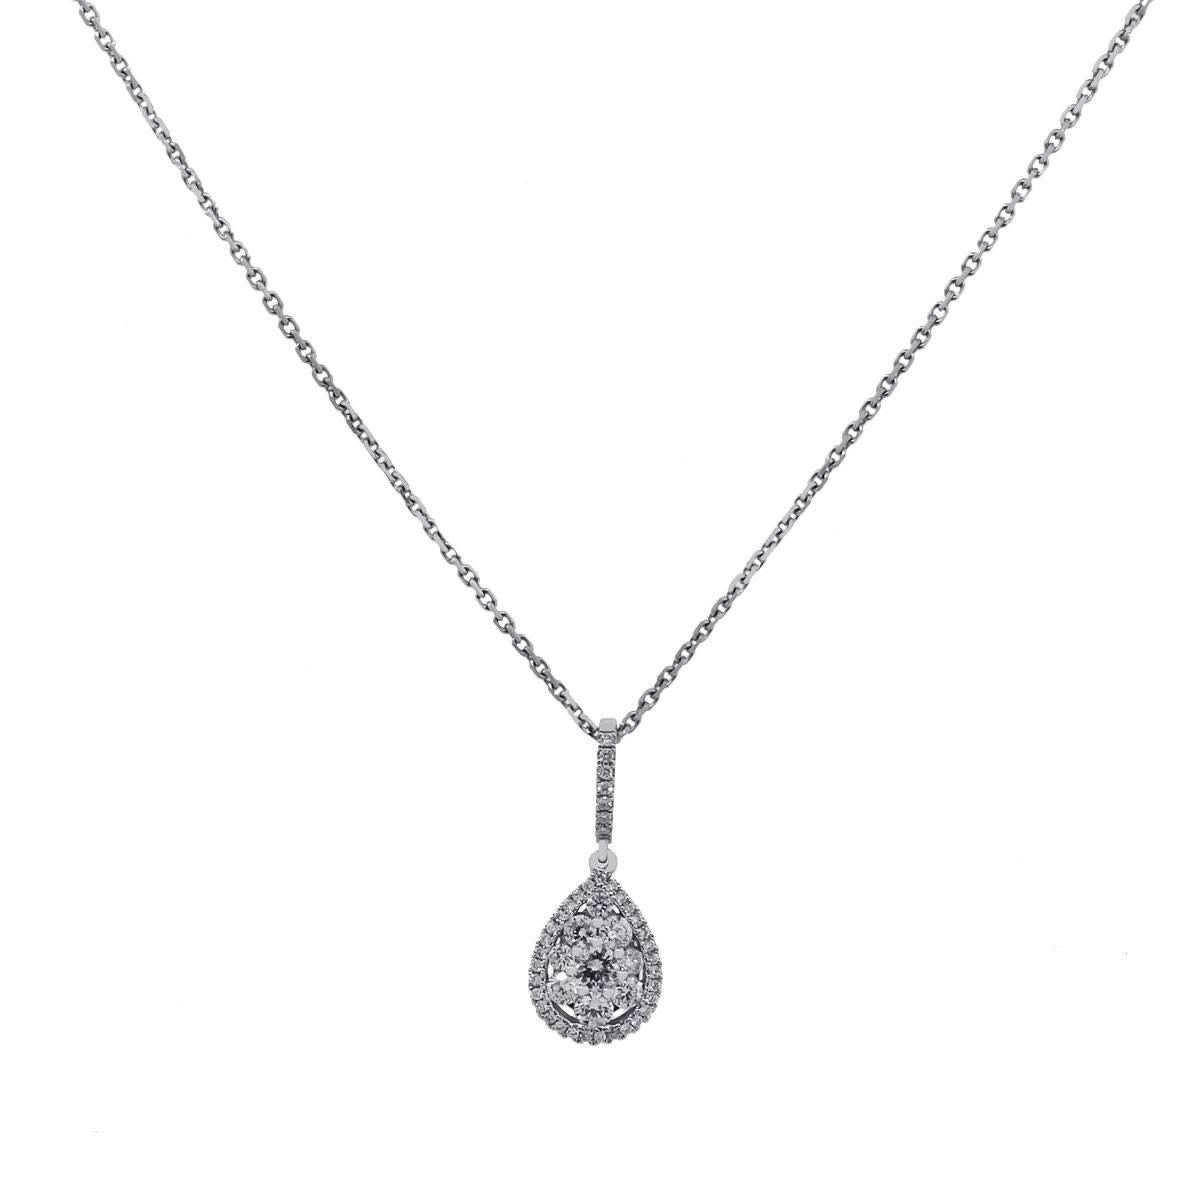 Material: 18k White Gold
Diamond Details: Approximately 0.70ctw round brilliant diamonds. Diamonds are G/H in color and SI in clarity.
Necklace Measurements: 18″
Clasp: Lobster clasp
Total Weight: 4.6g (3.0dwt)
SKU: A30310510/G5606